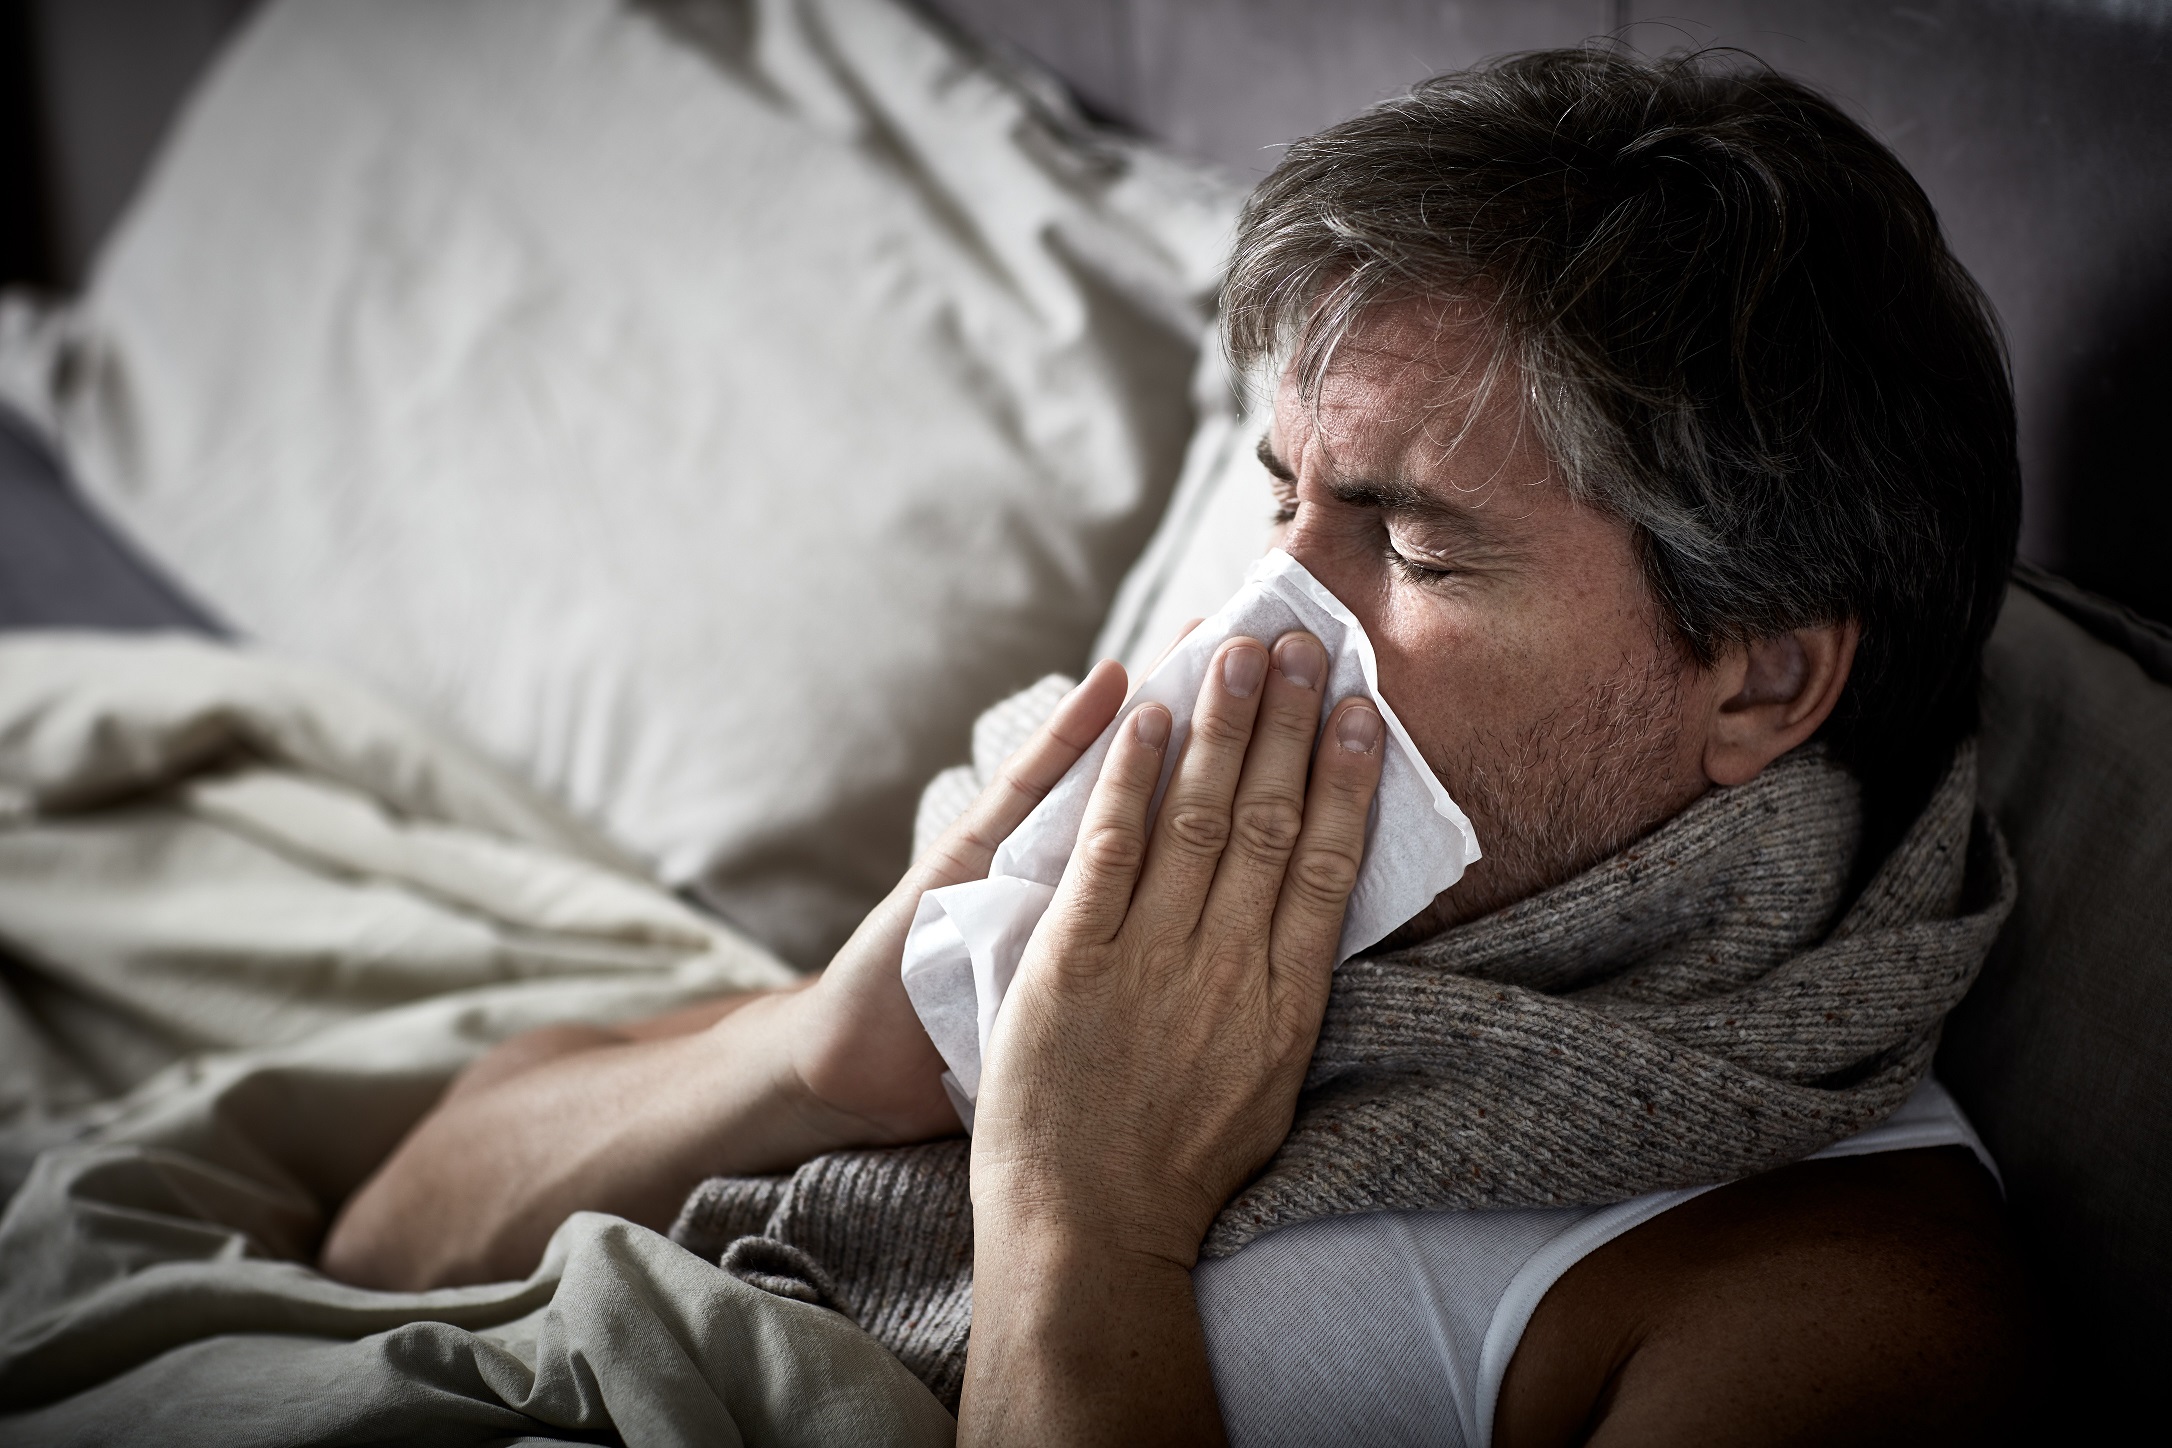 A middle-aged man is in bed with the flu, sneezing into a tissue.